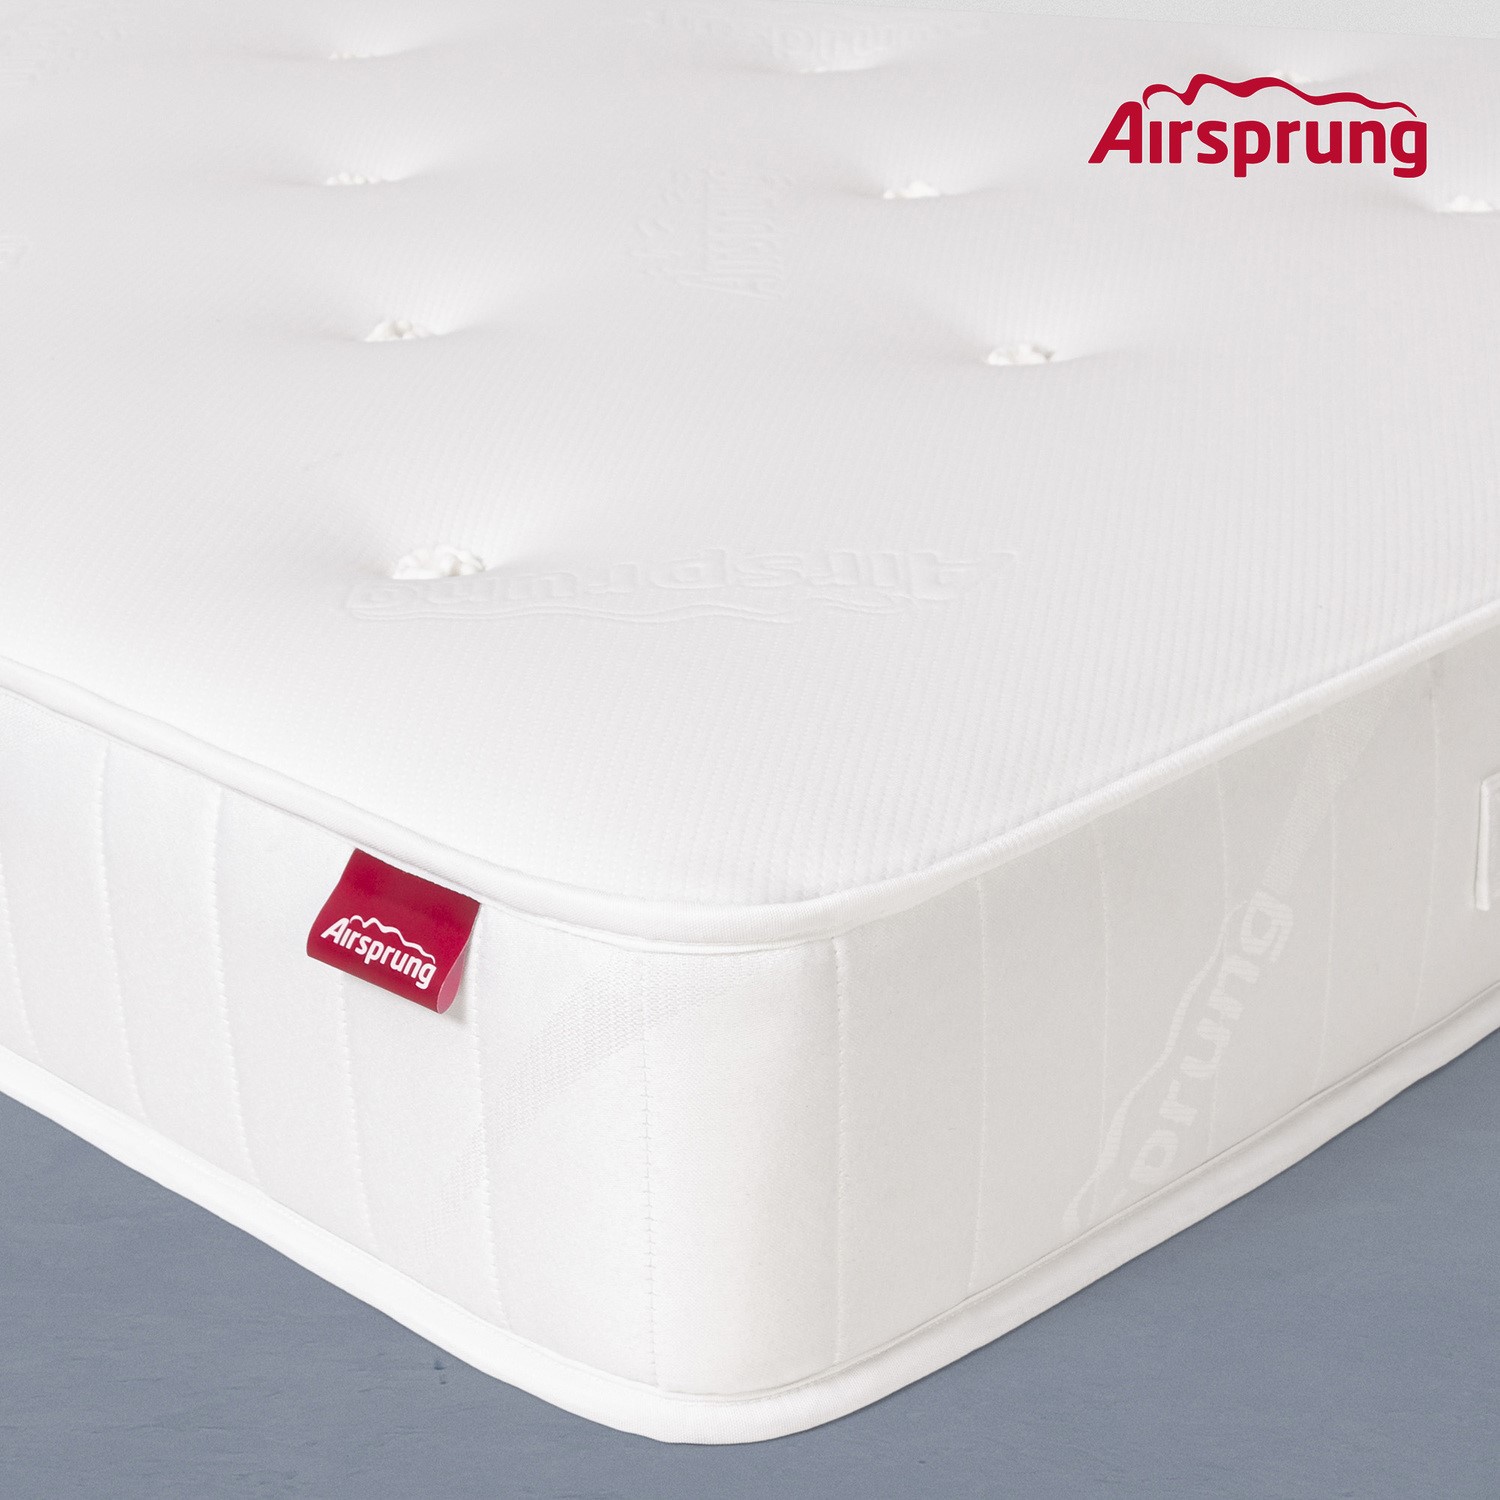 Airsprung ultra firm rolled coil spring mattress - double